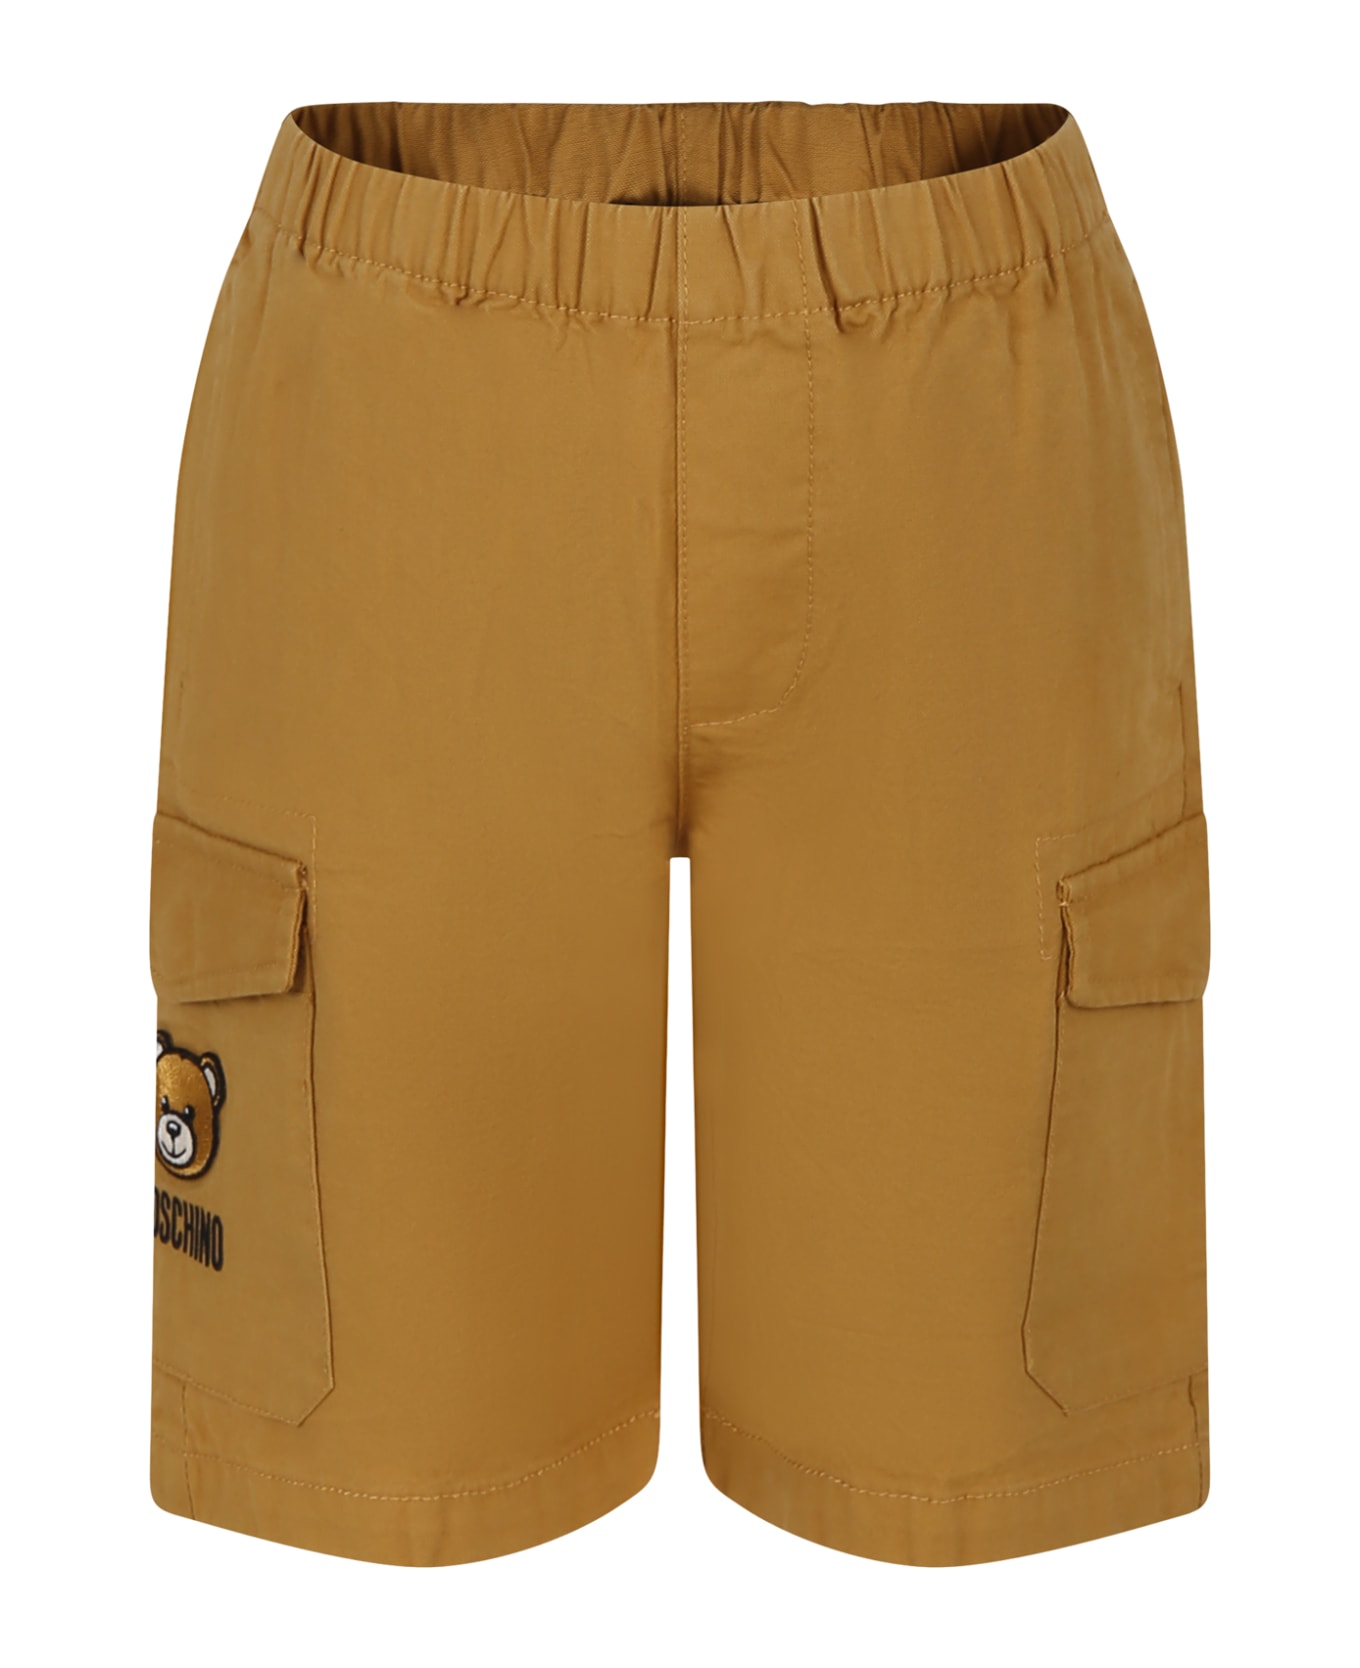 Moschino Borown Shorts For Kids With Teddy Bear And Logo - Brown